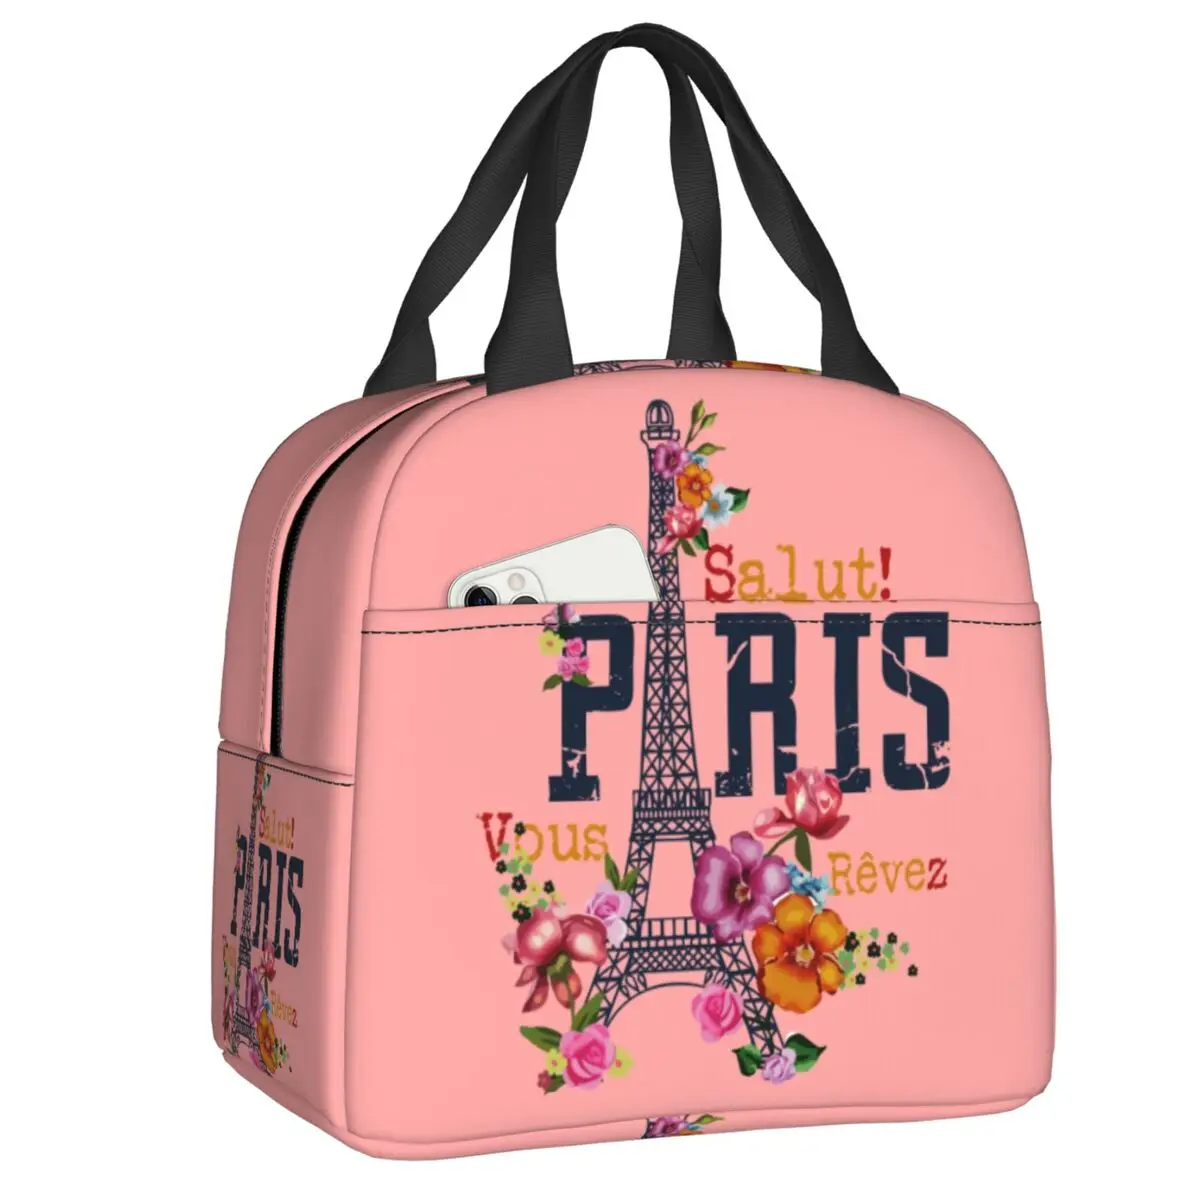 

Romantic Paris Floral Eiffel Tower Insulated Lunch Bags for Women Resuable Thermal Cooler Food Lunch Box School